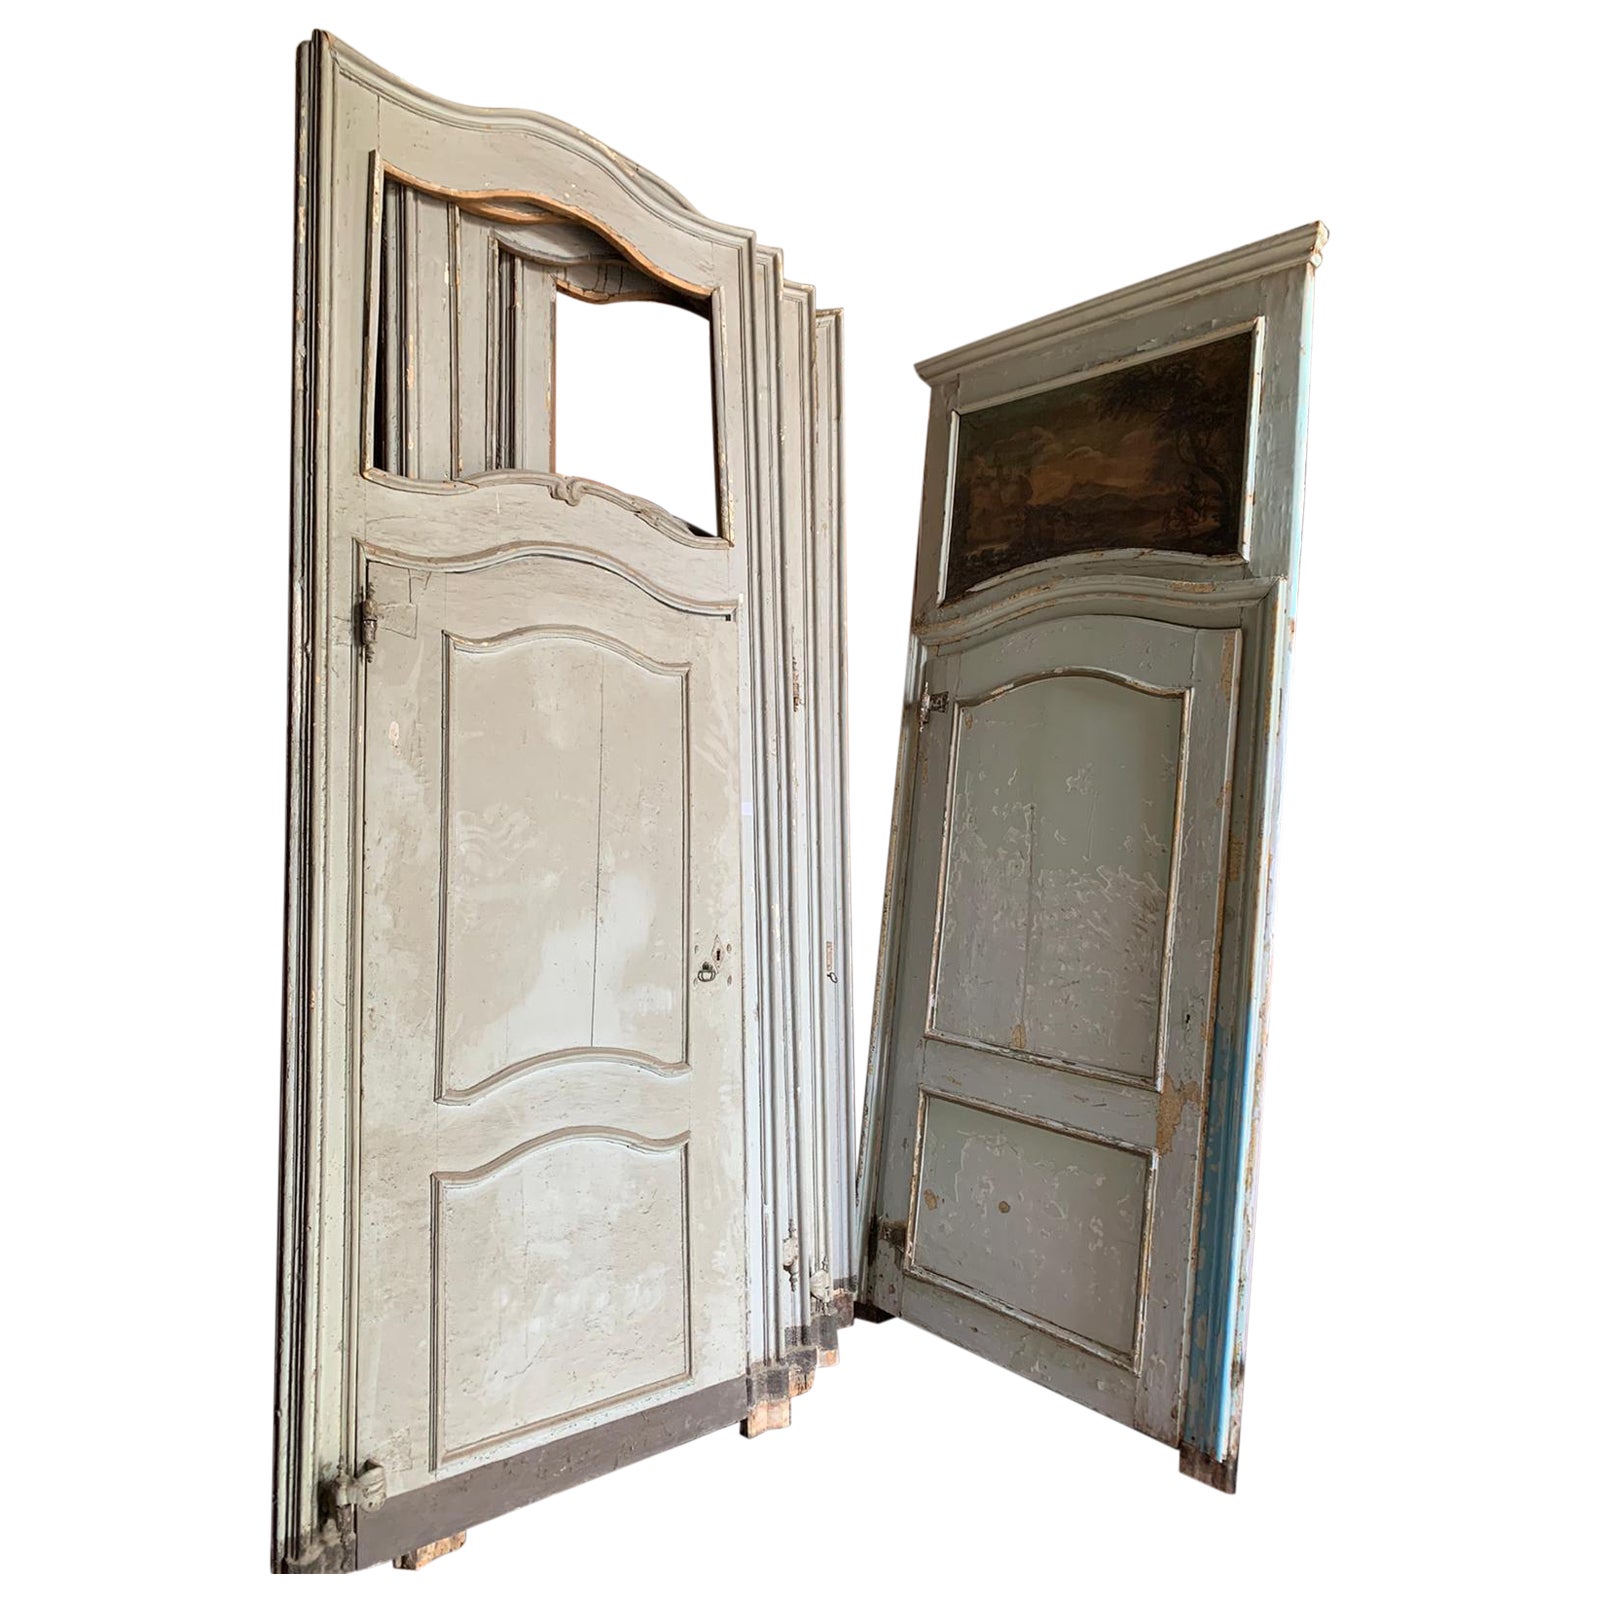 Set of 8 Lacquered Interior Doors with Frame and Overdoor, '700 Italy